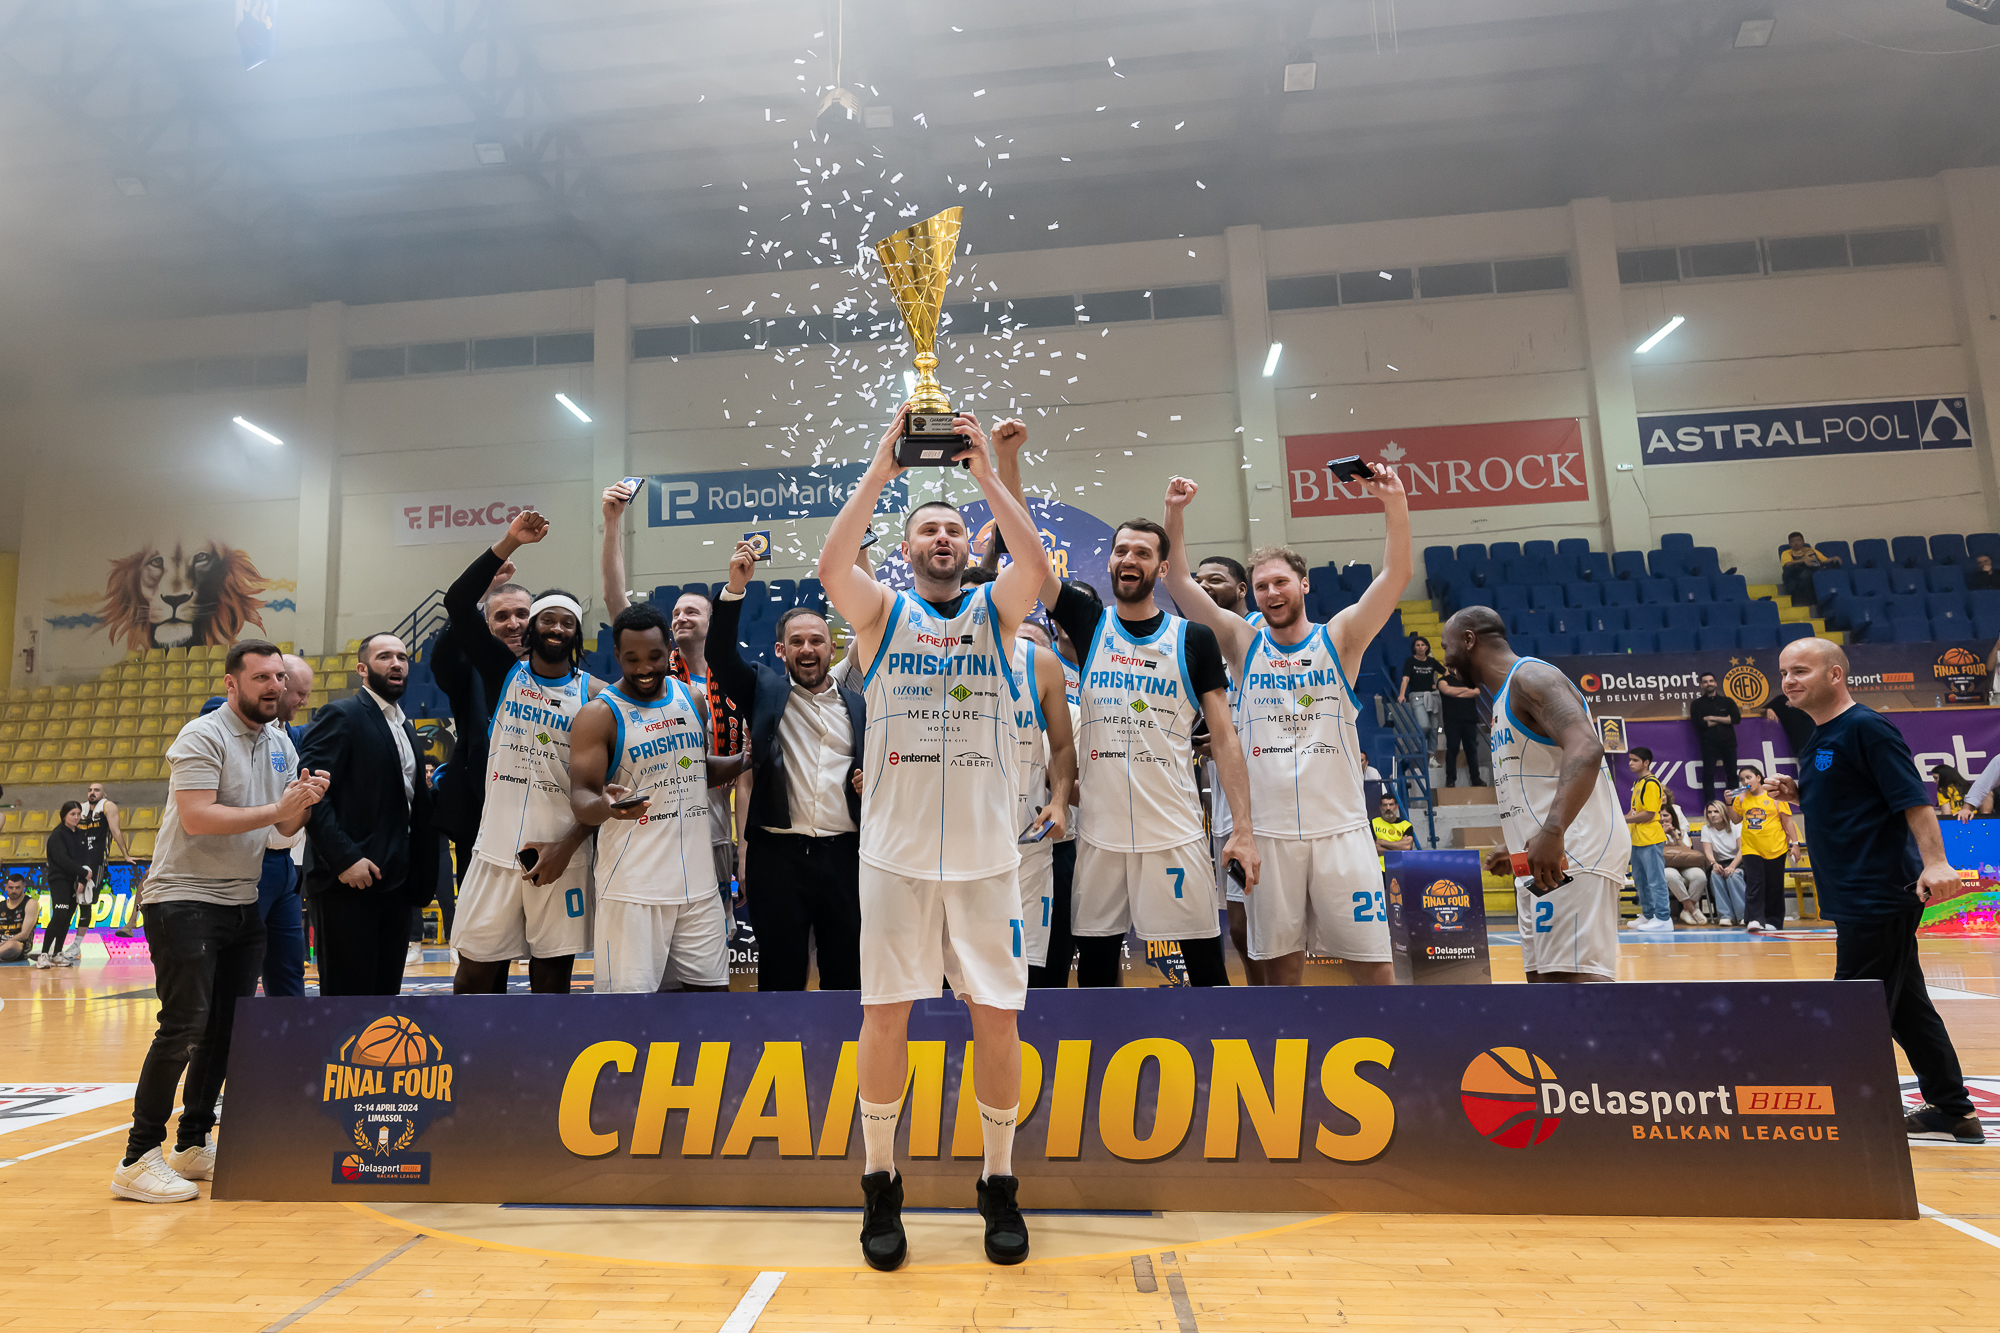 Third final - third title for Sigal Prishtina after a great championship game in Limassol